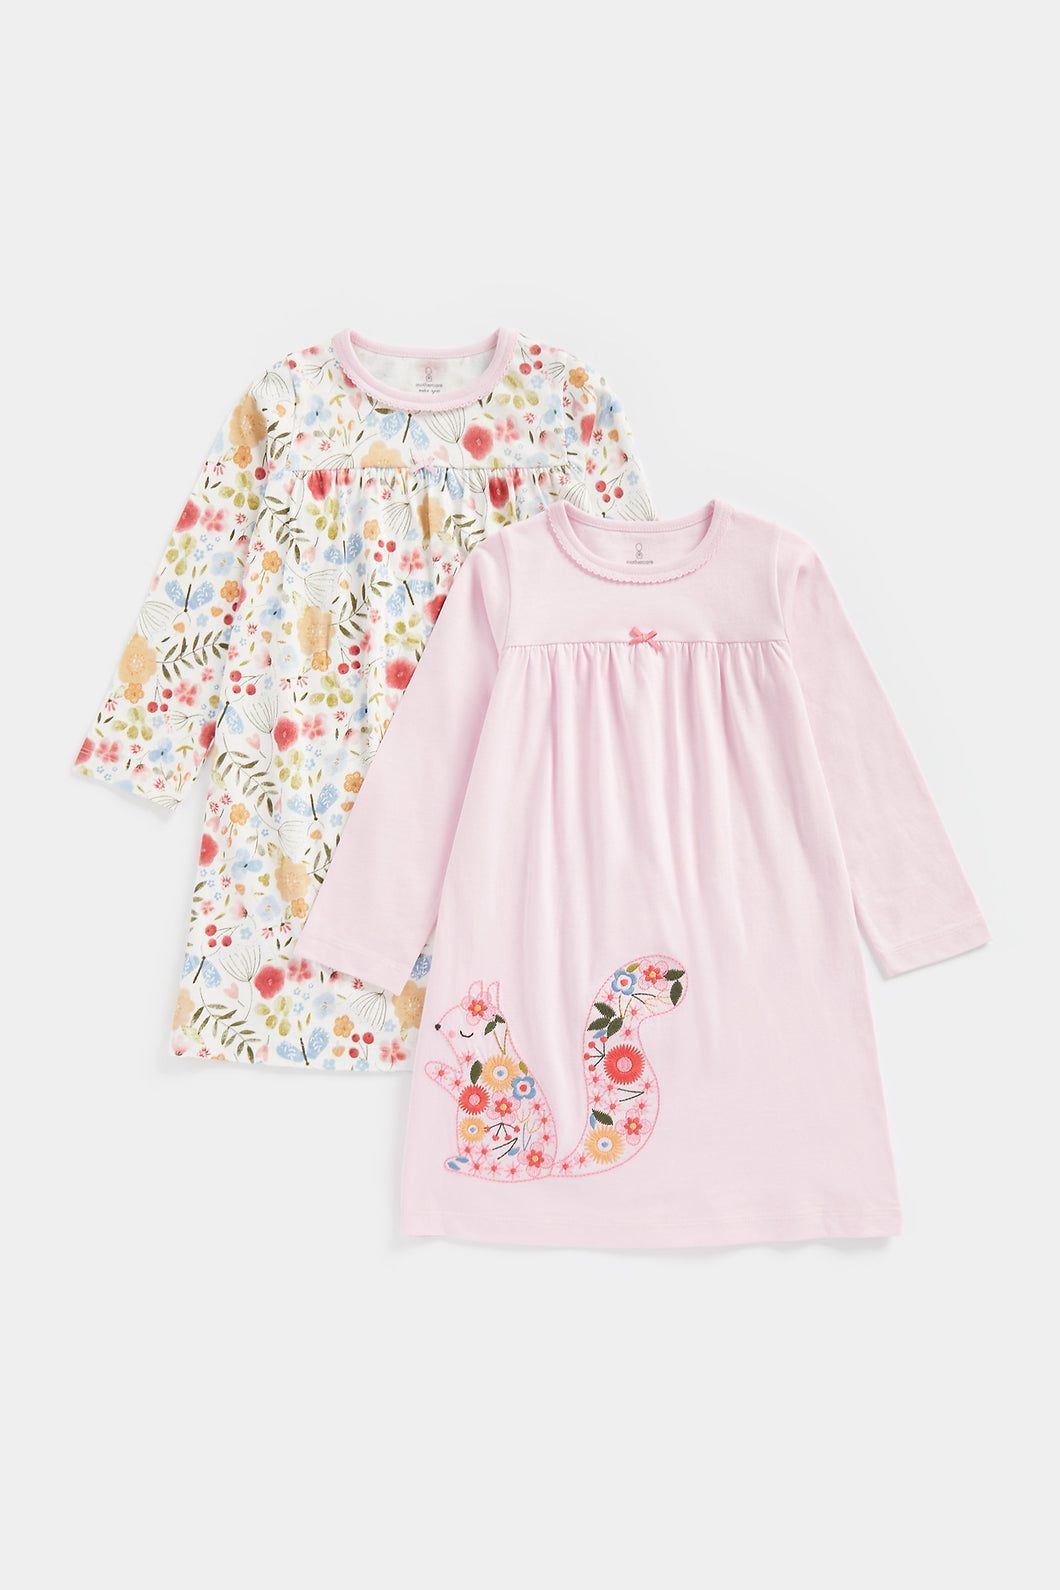 Mothercare Woodland Nightdresses - 2 Pack